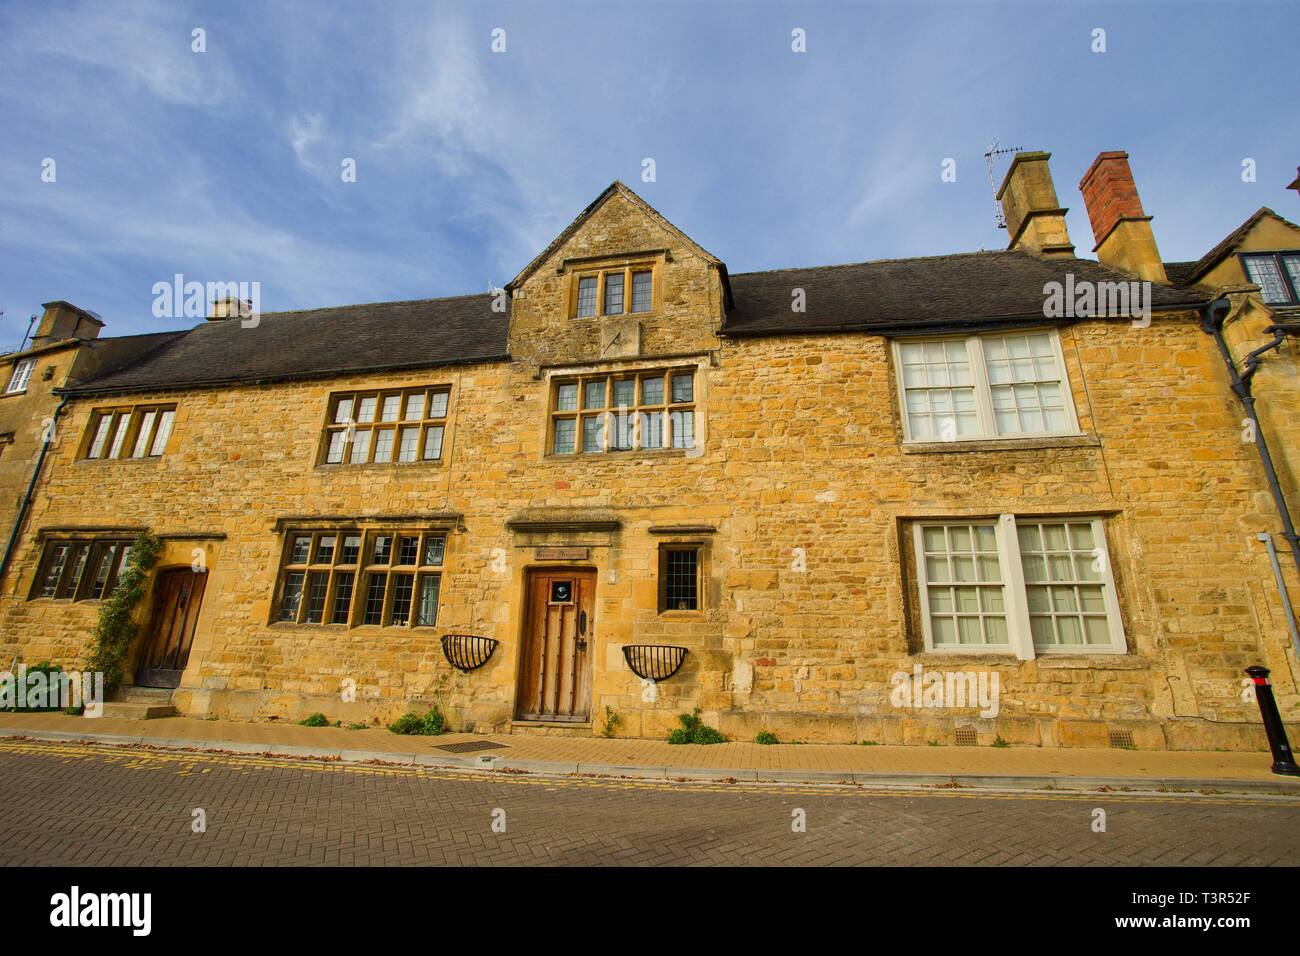 Chipping Campden, Gloucestershire, England. Stock Photo